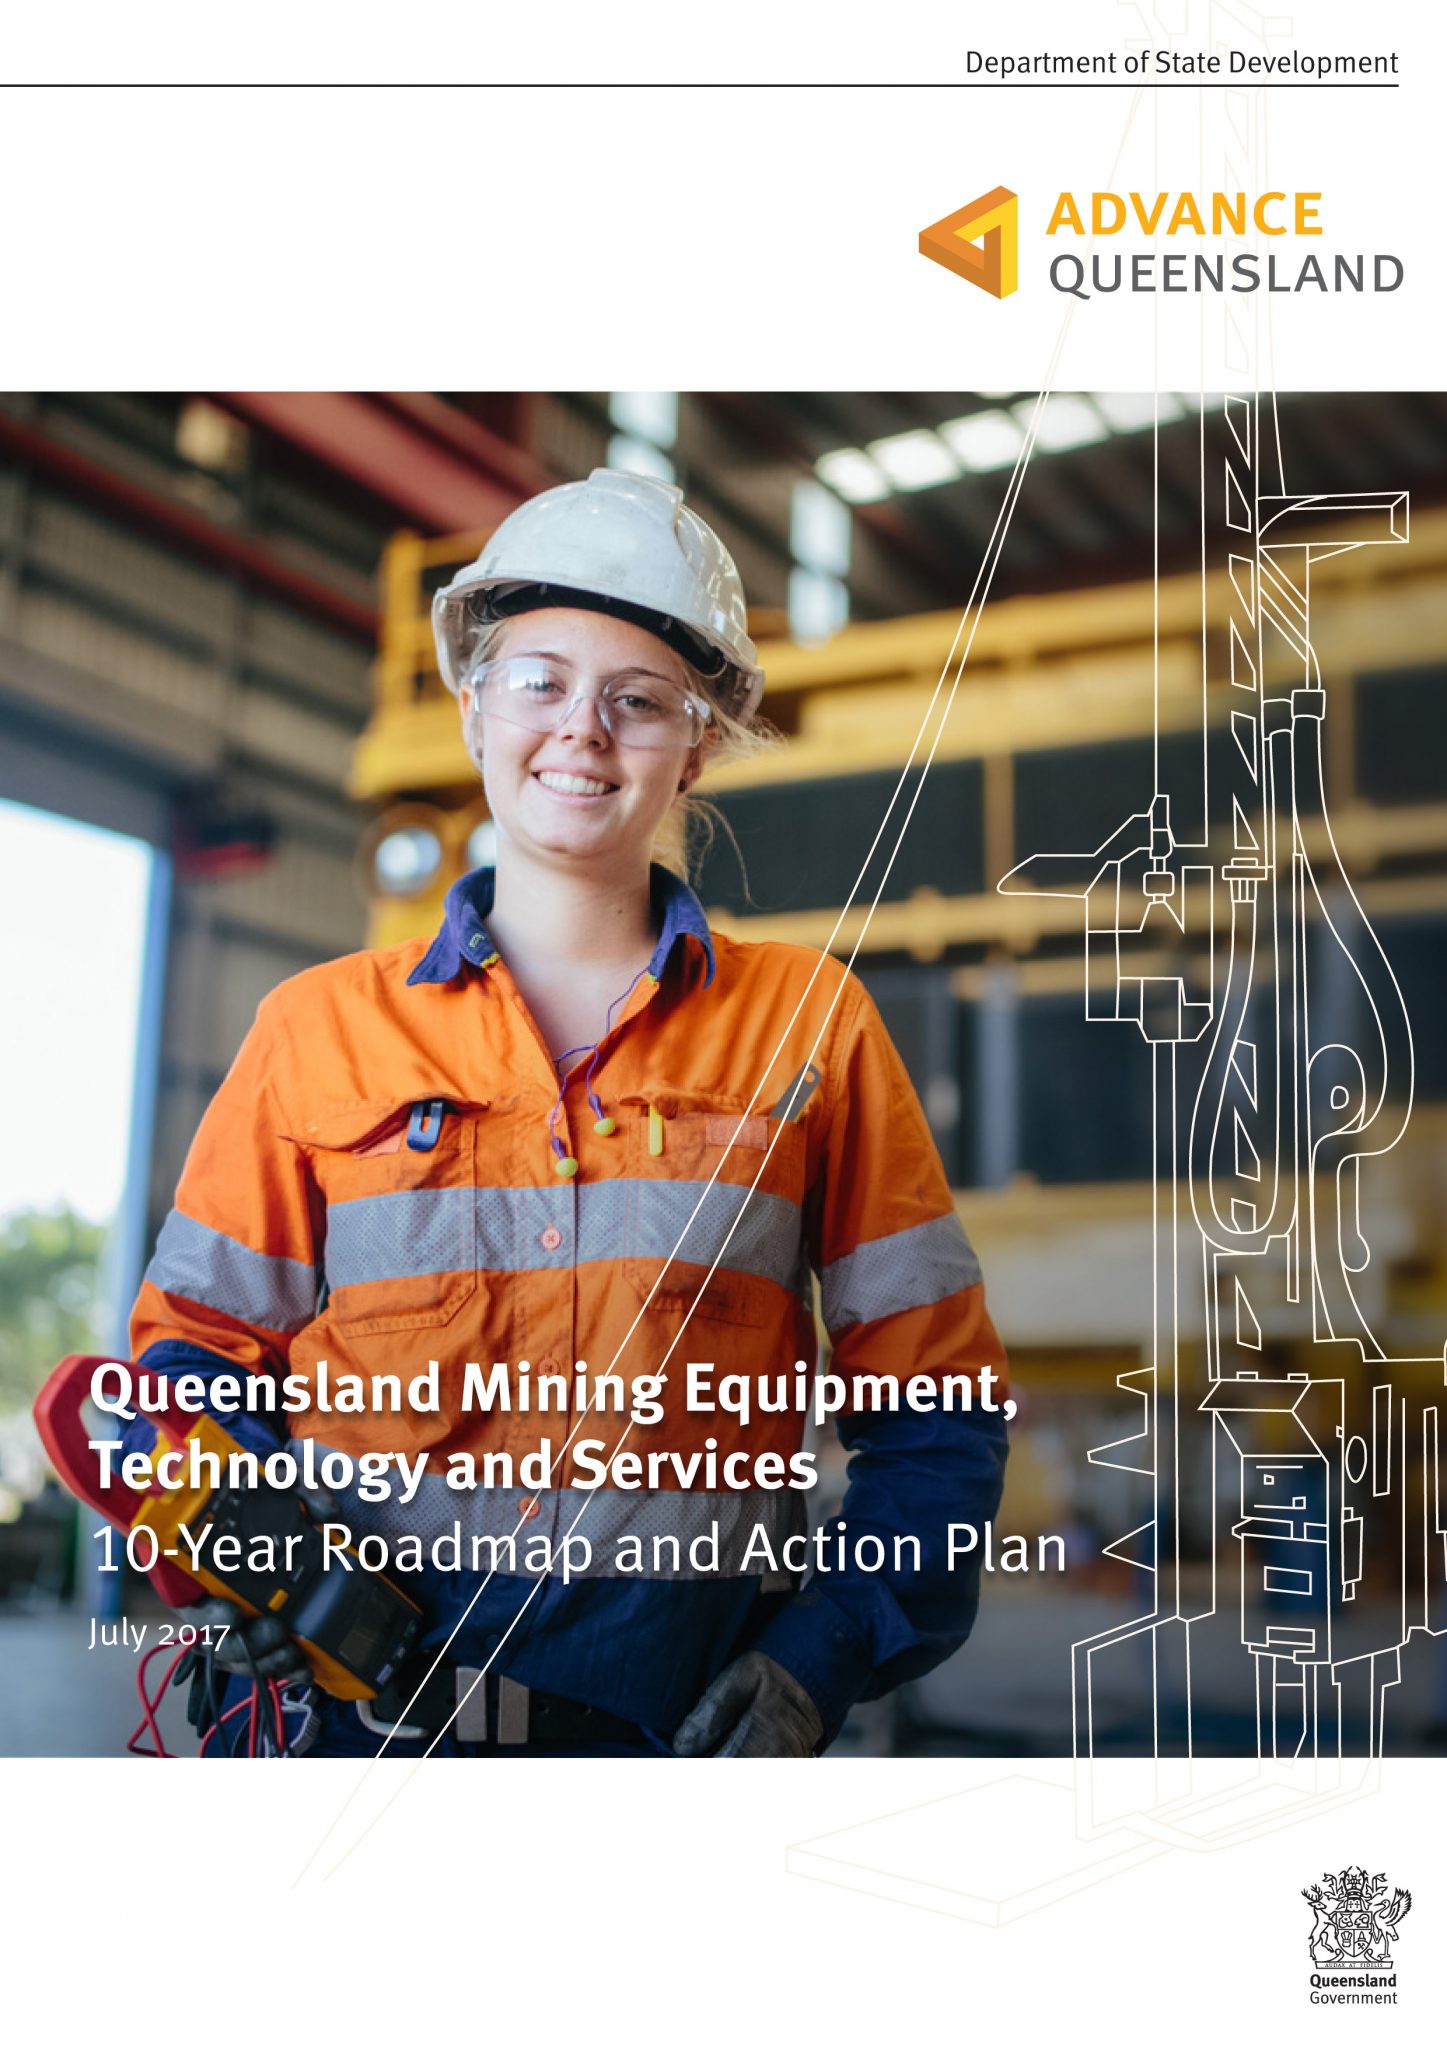 Qld government mining jobs expo